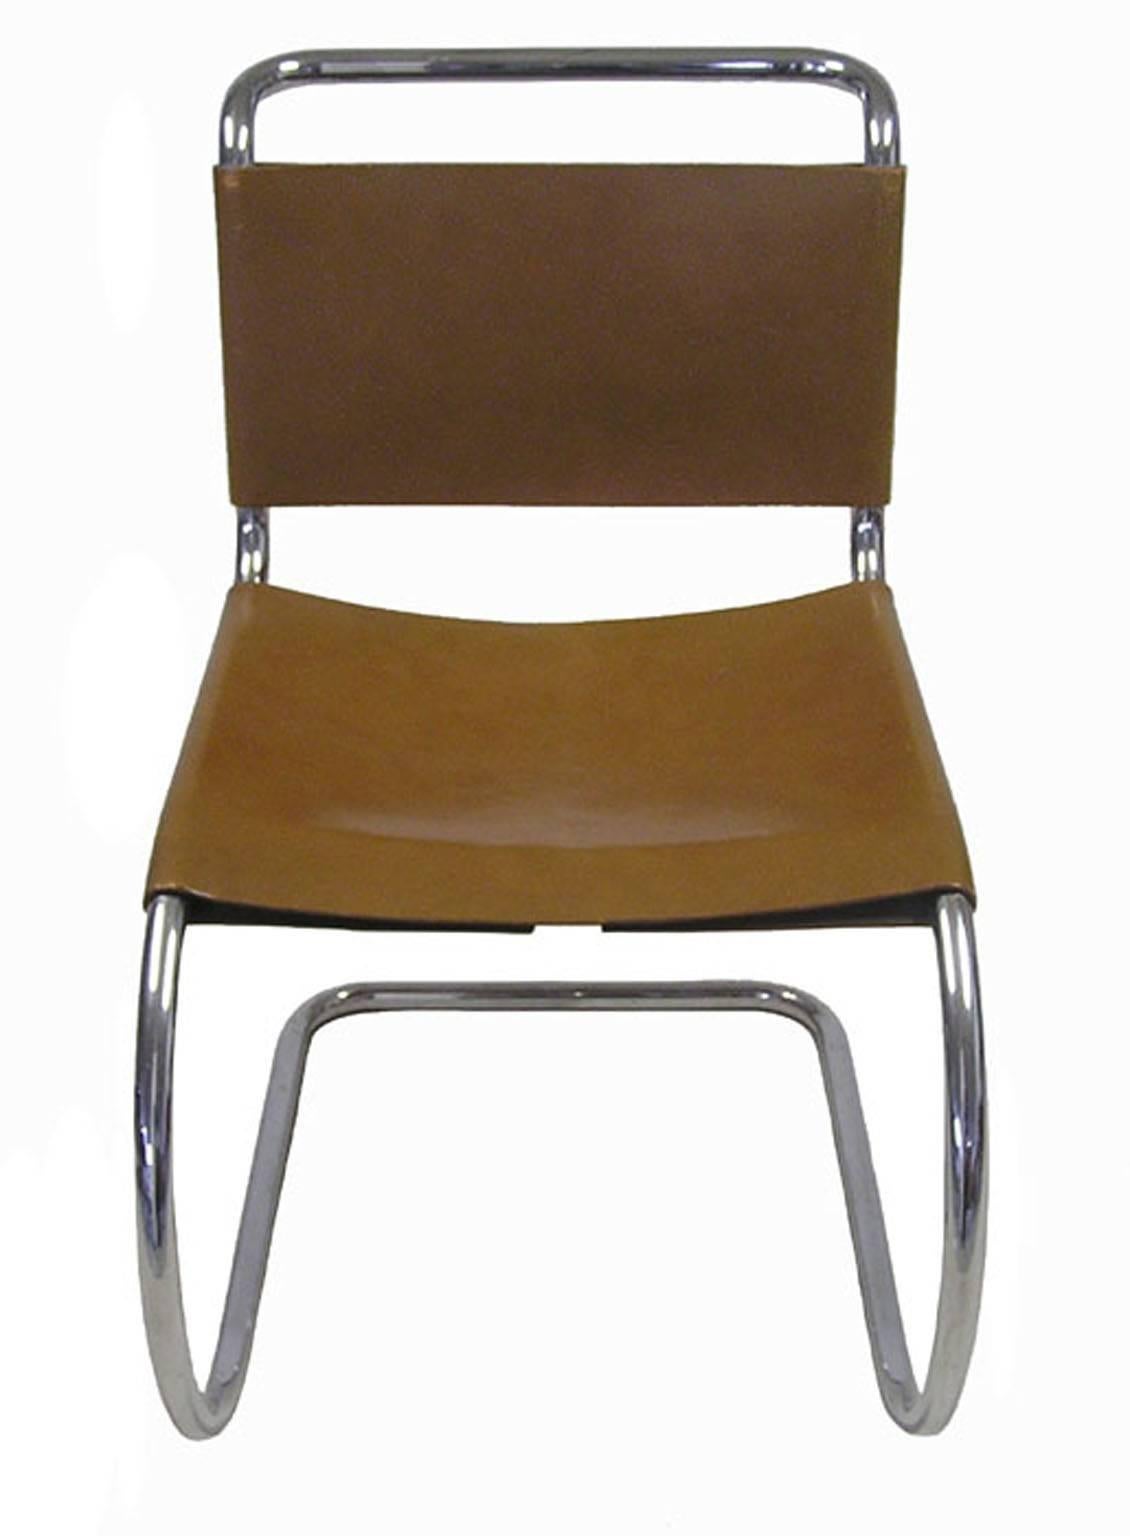 Bauhaus 1970s Mies van der Rohe MR10 Side Chairs, Set of Four